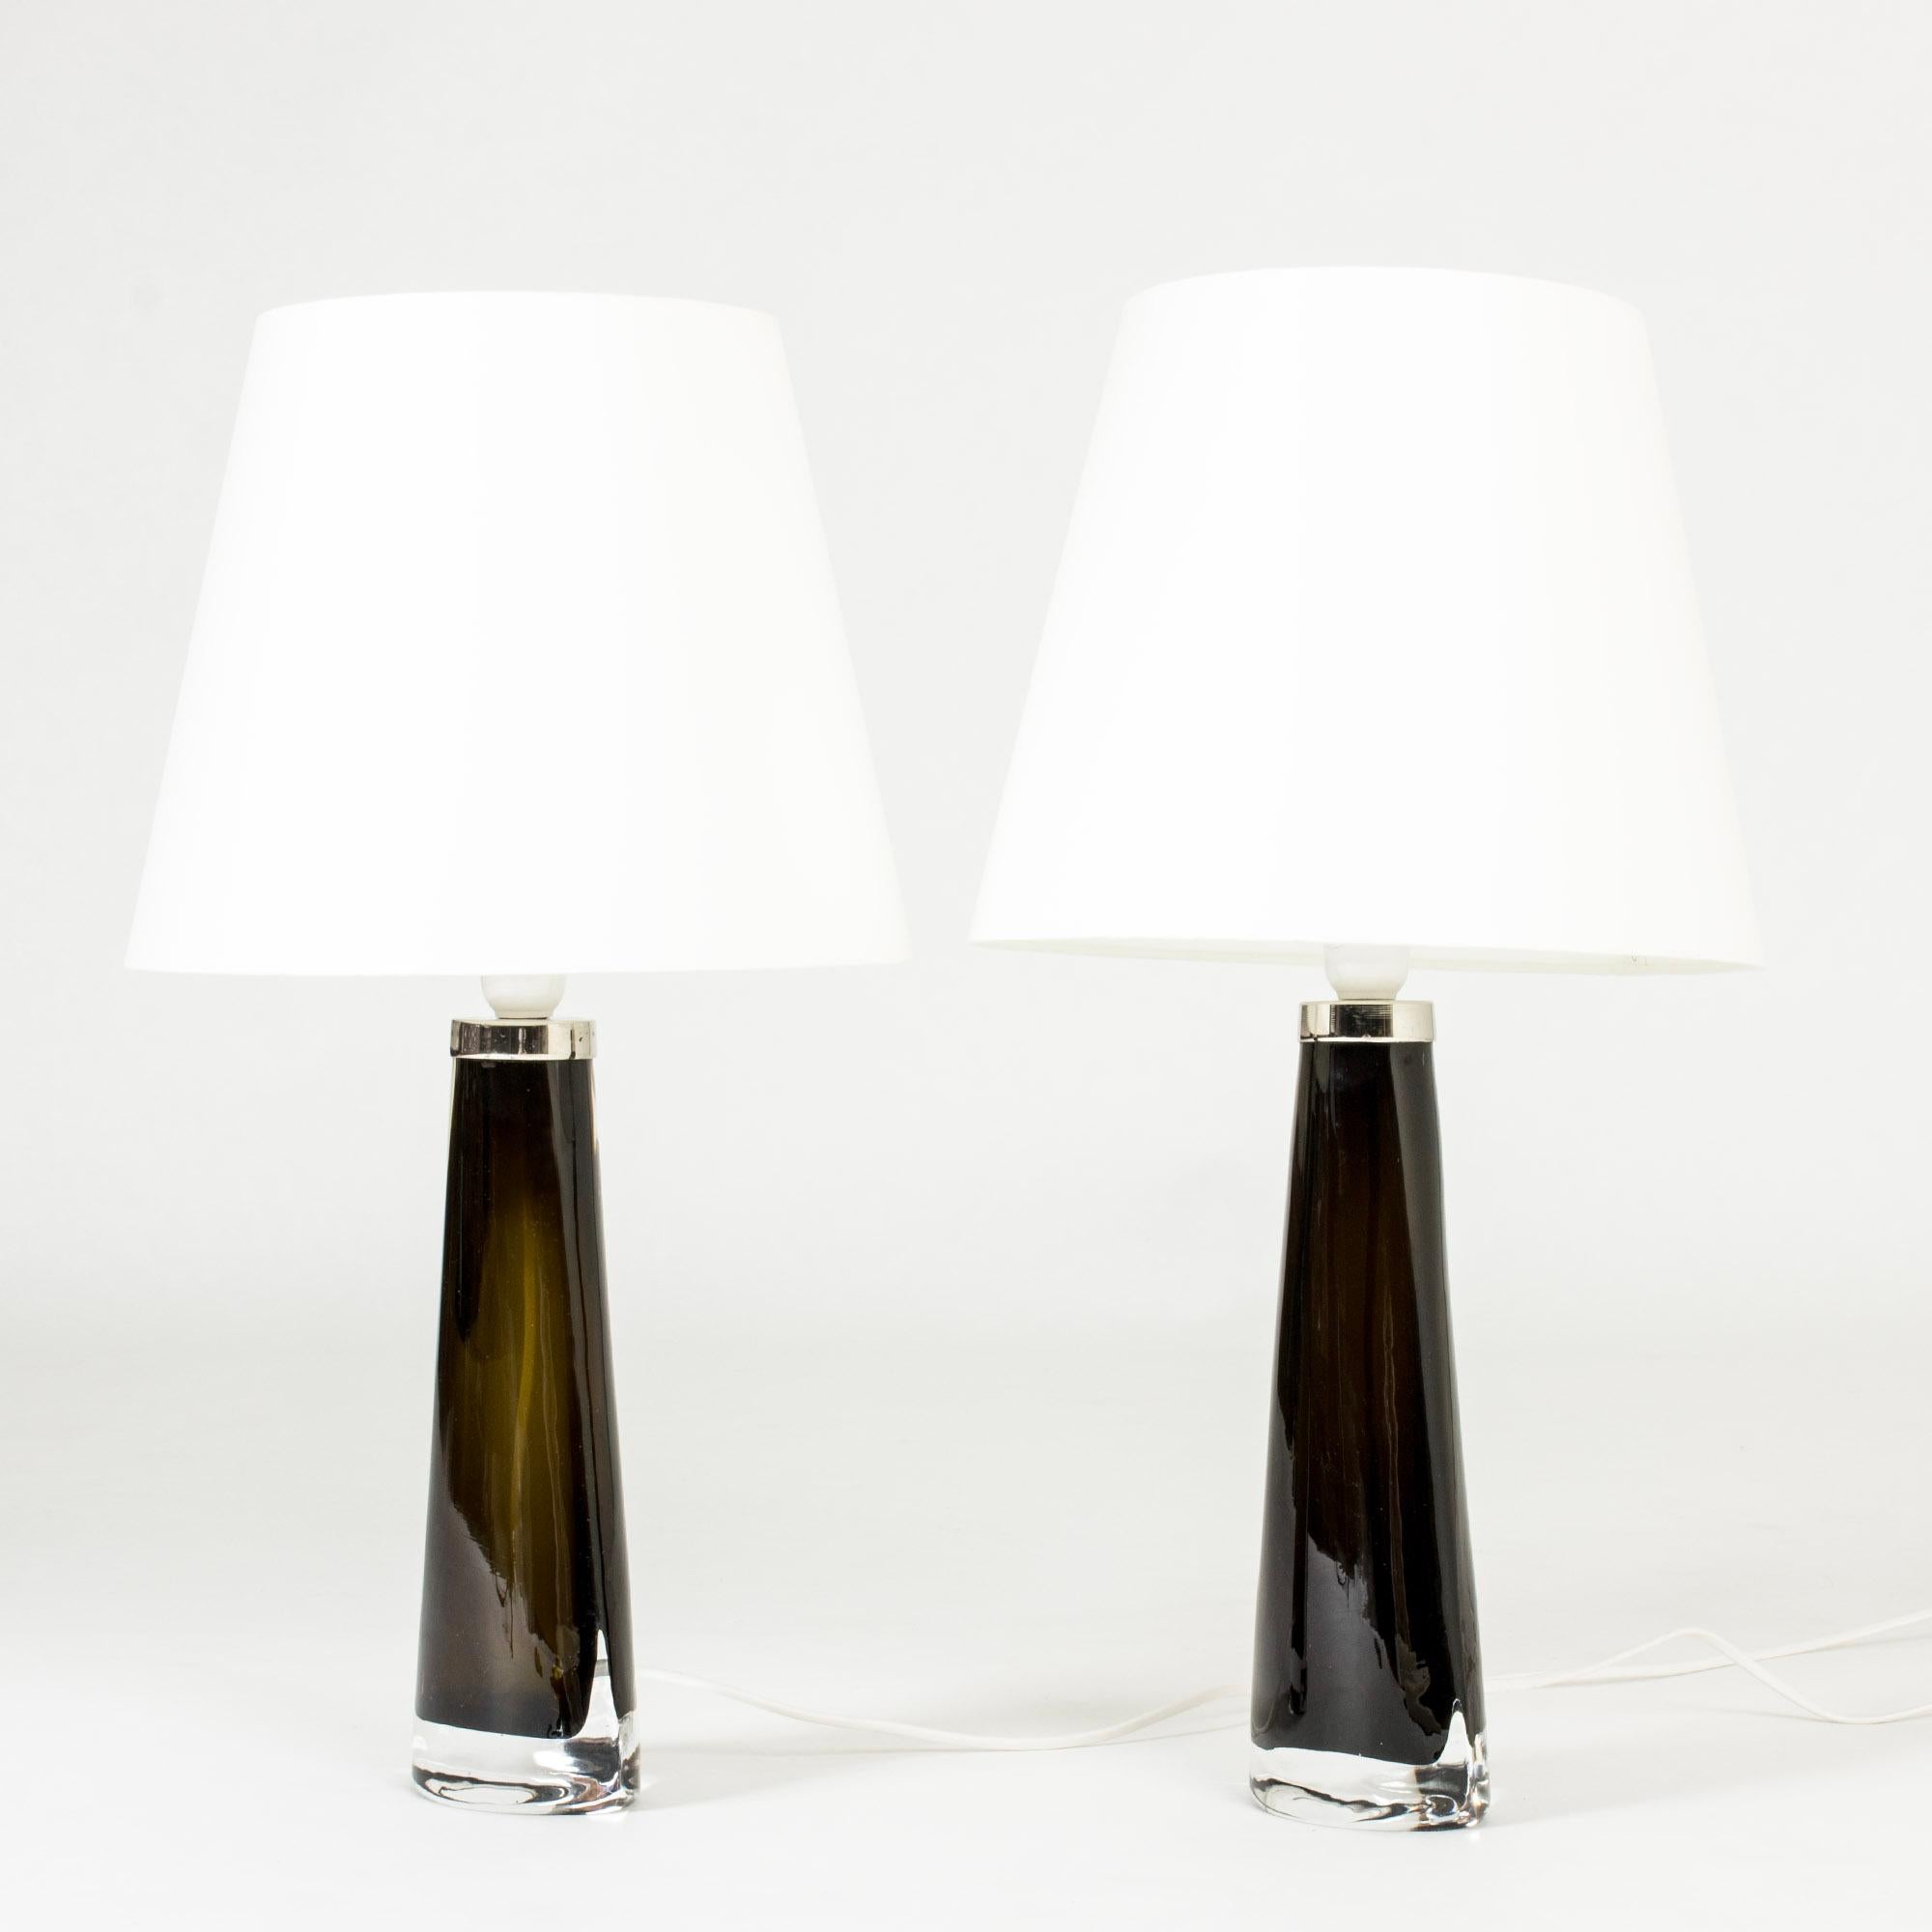 Scandinavian Modern Midcentury Glass Table Lamps by Carl Fagerlund, Orrefors, Sweden, 1960s